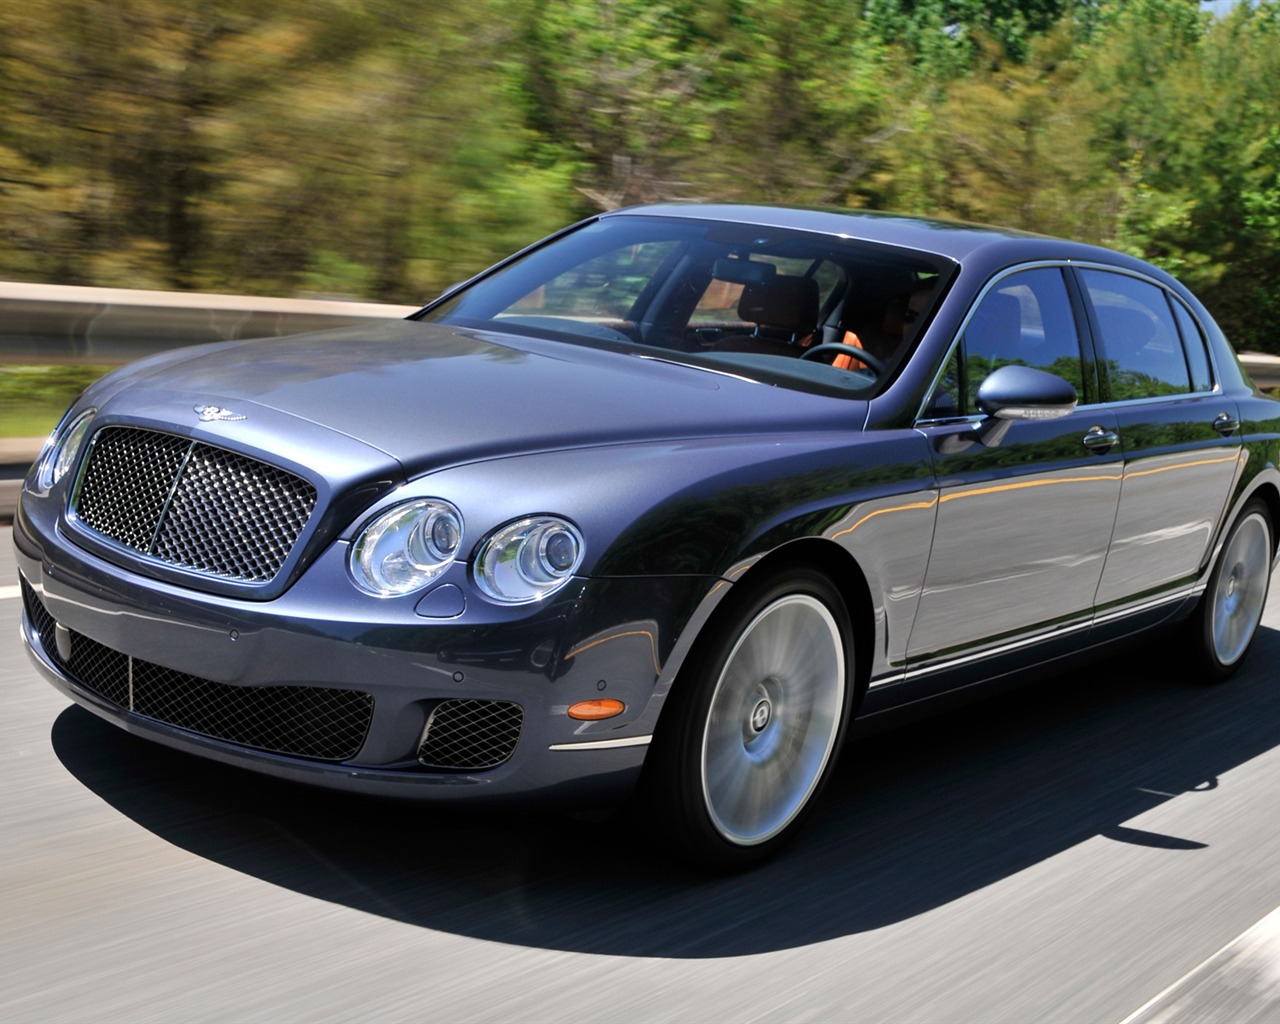 Bentley Continental Flying Spur Speed - 2008 宾利11 - 1280x1024